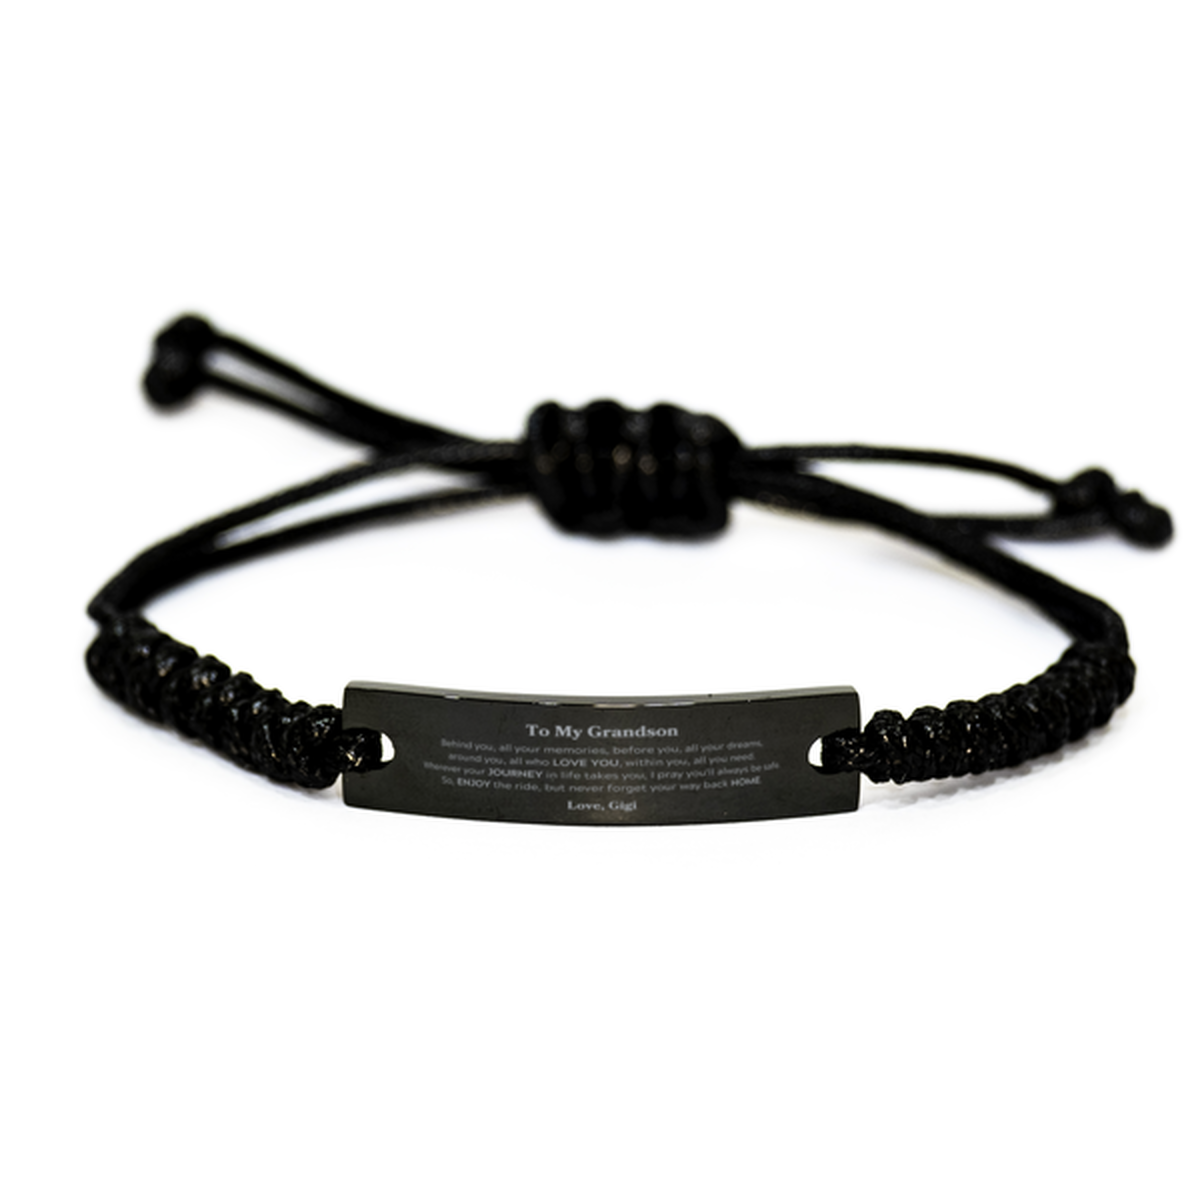 To My Grandson Graduation Gifts from Gigi, Grandson Black Rope Bracelet Christmas Birthday Gifts for Grandson Behind you, all your memories, before you, all your dreams. Love, Gigi